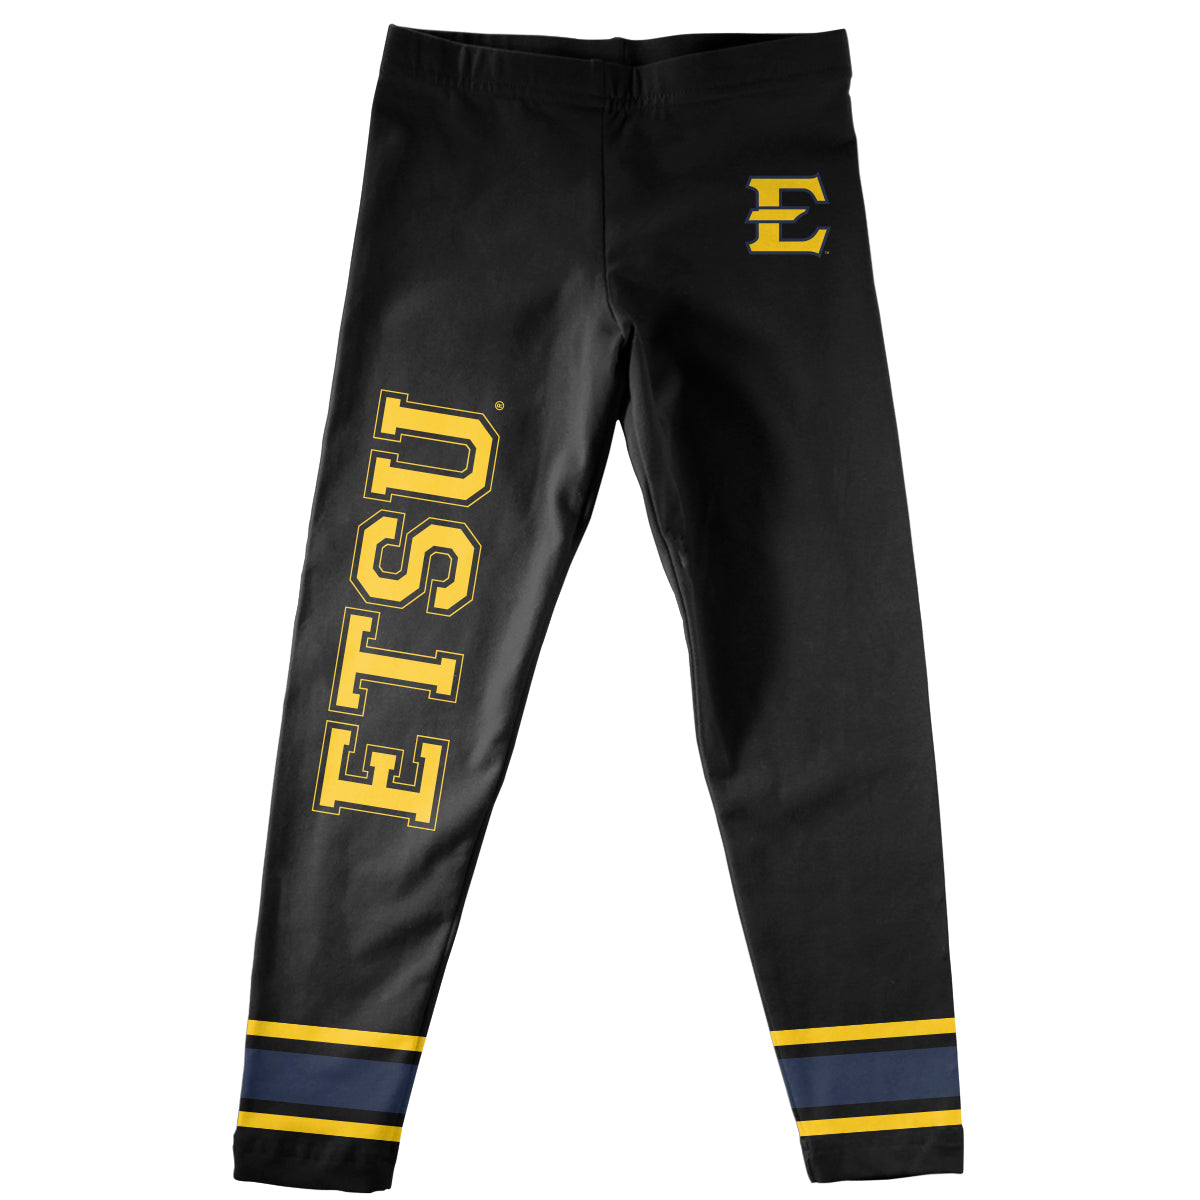 East Tennessee State Verbiage And Logo Black Stripes Leggings